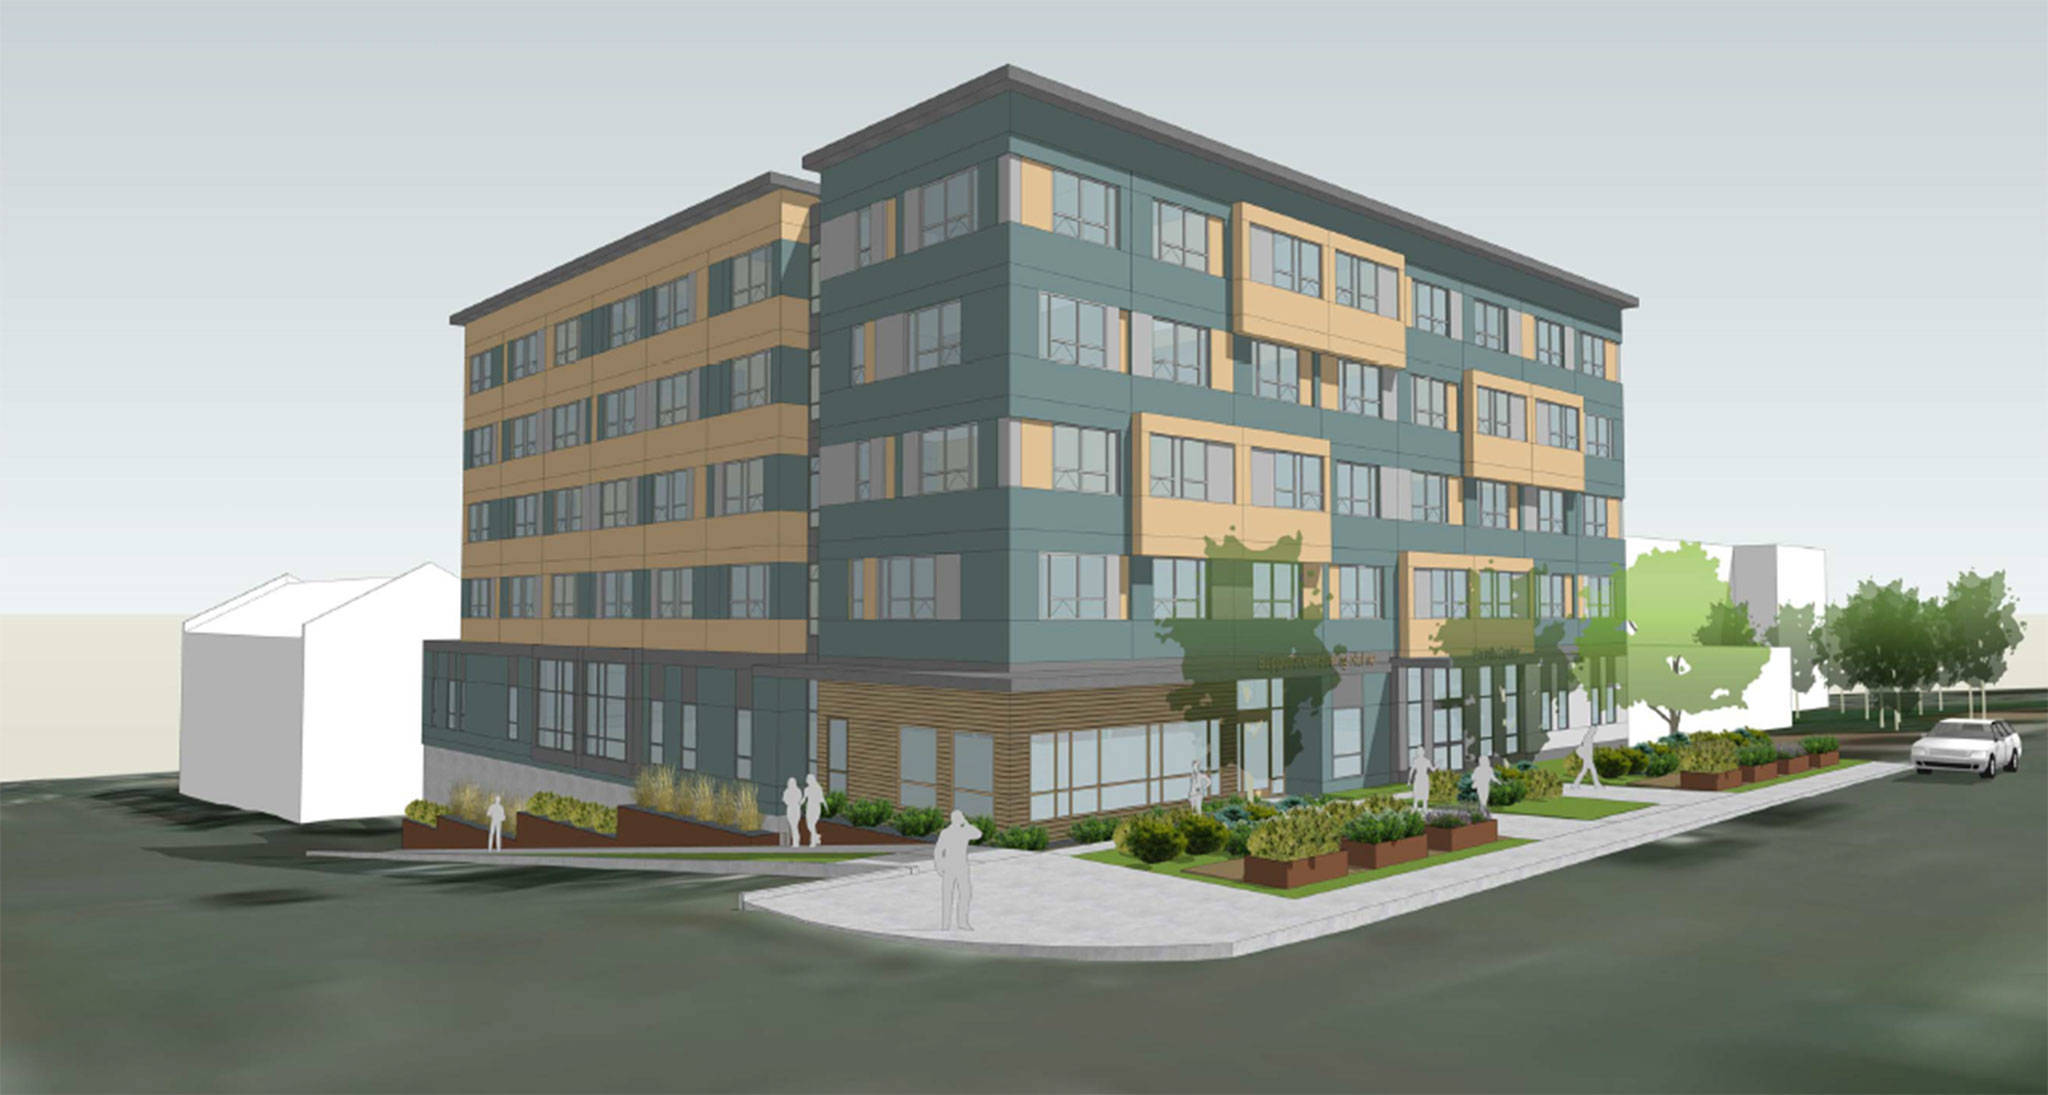 A rendering of Compass Health’s newest project, an 82-unit supportive housing building at the corner of Lombard Avenue and 33rd Street. (Compass Health)